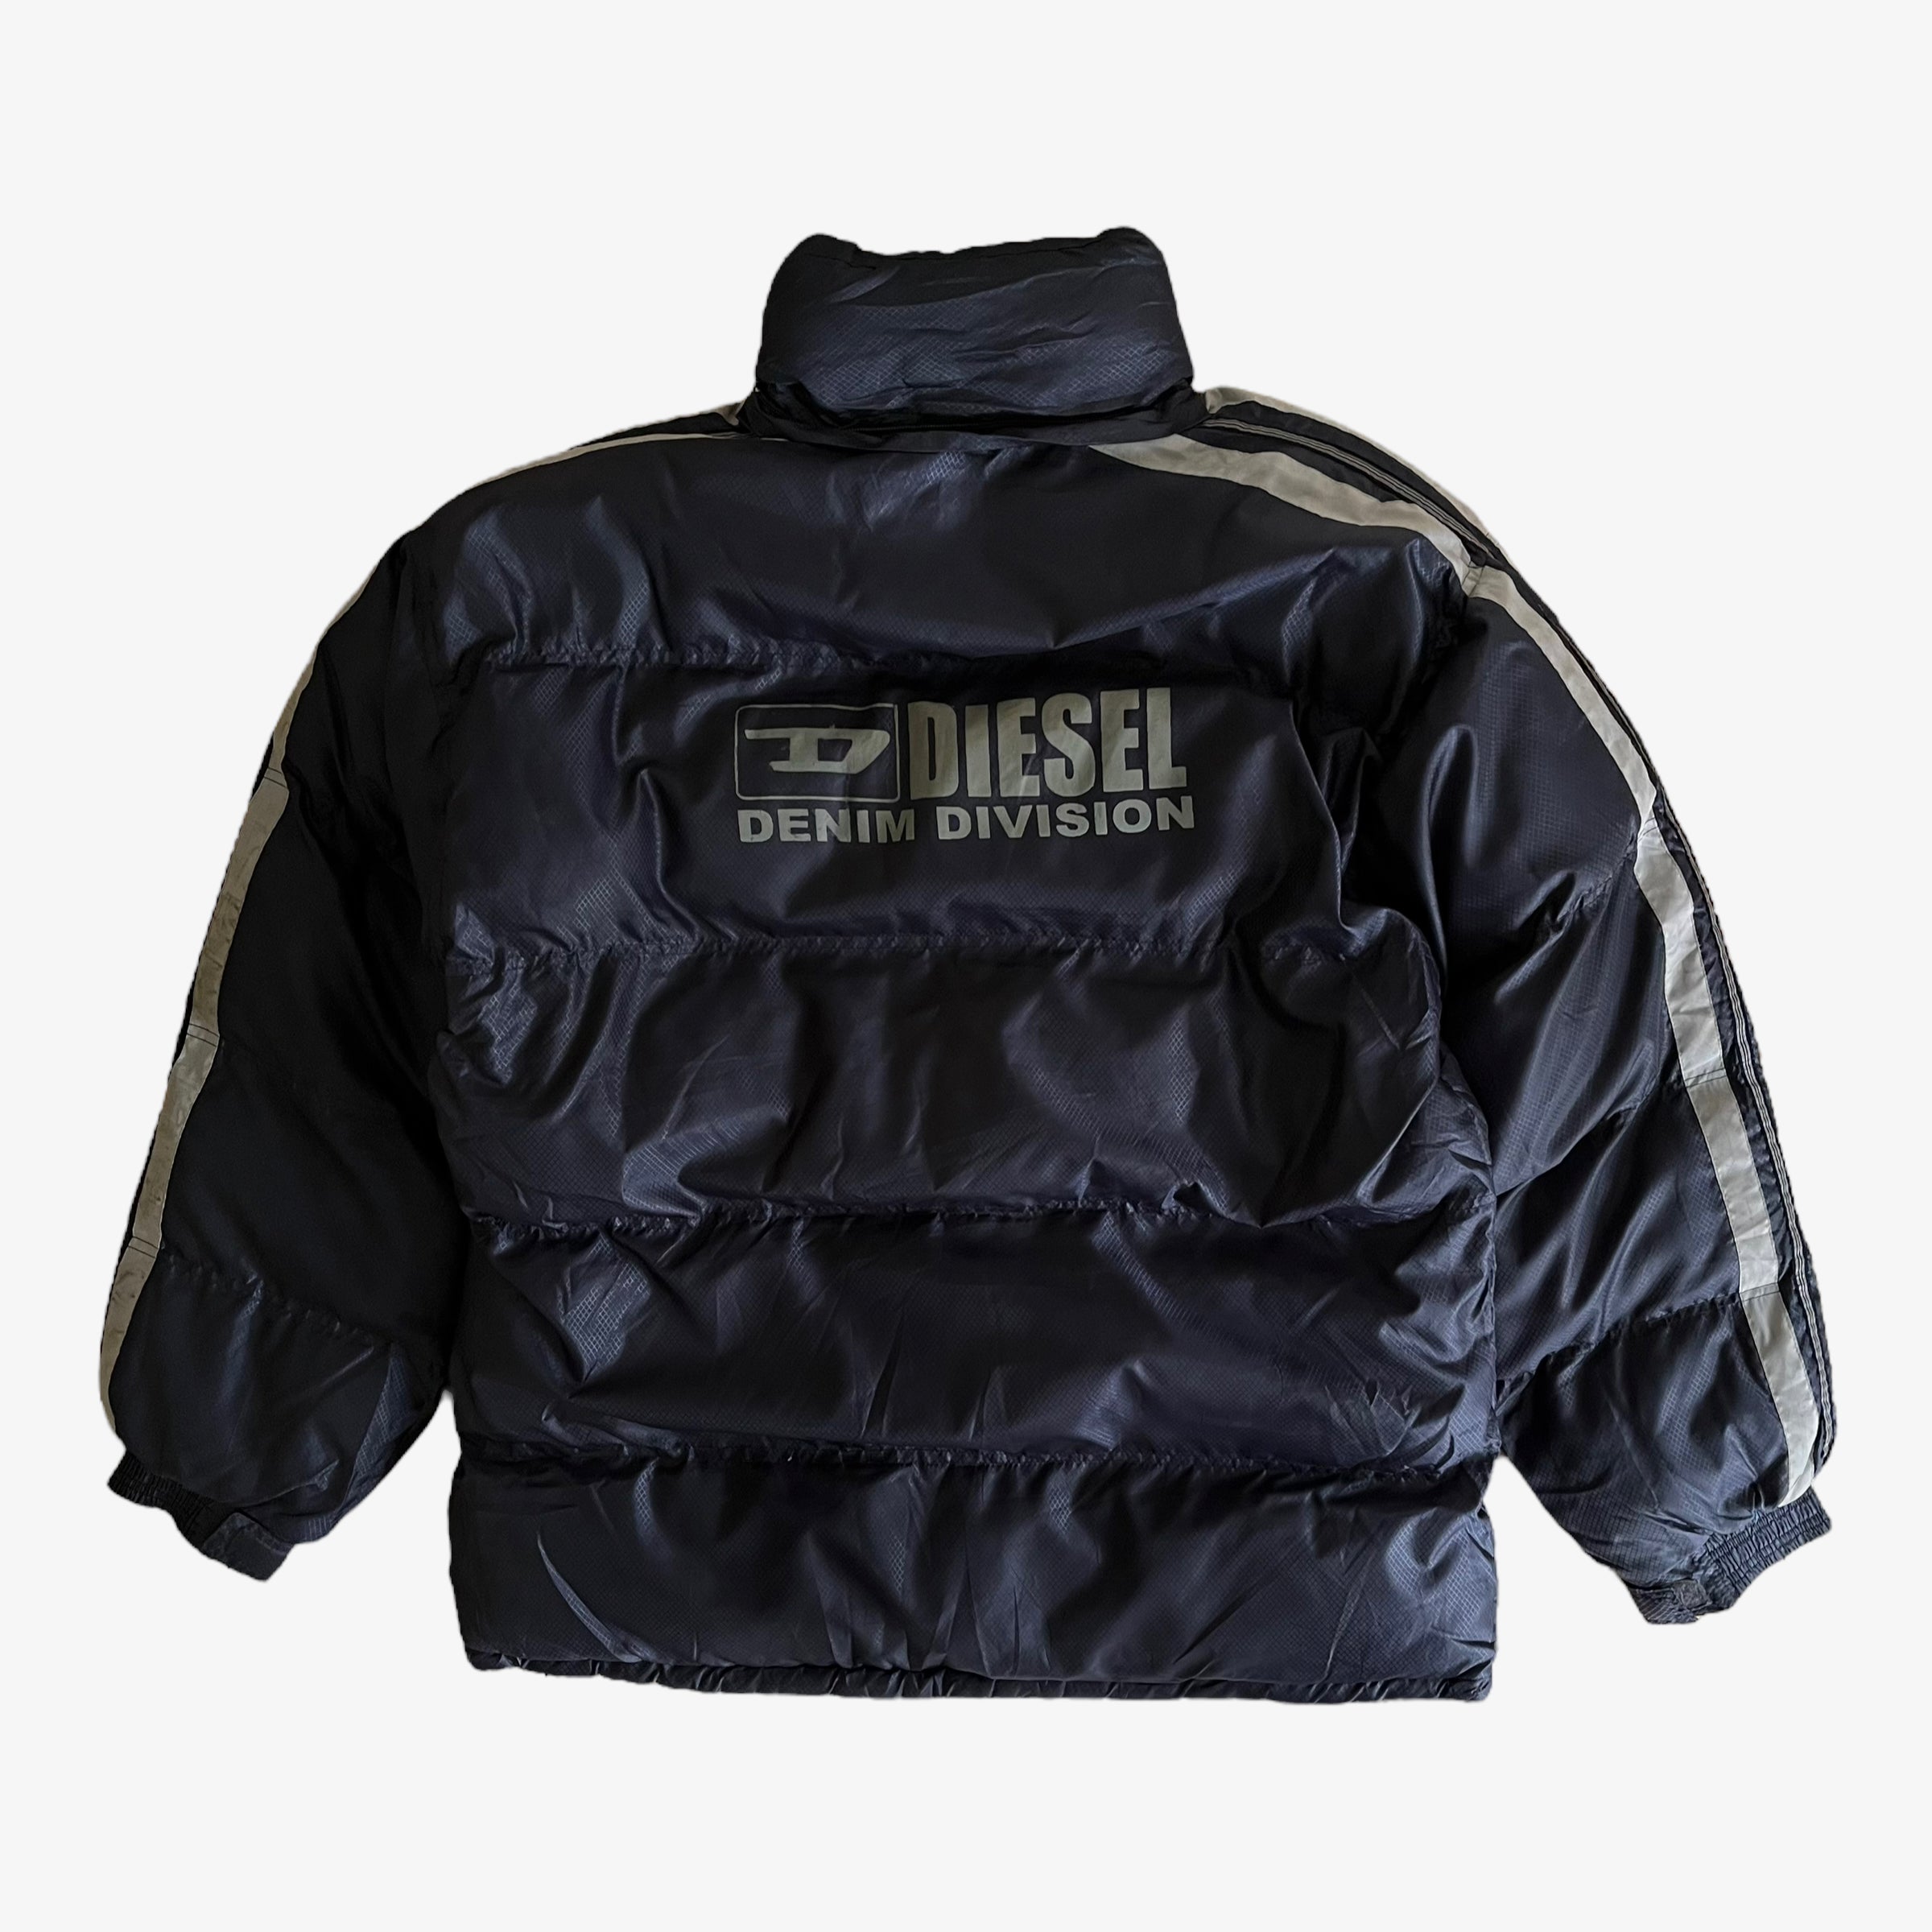 Diesel Denim Division Puffer Jacket With Back Spell Out